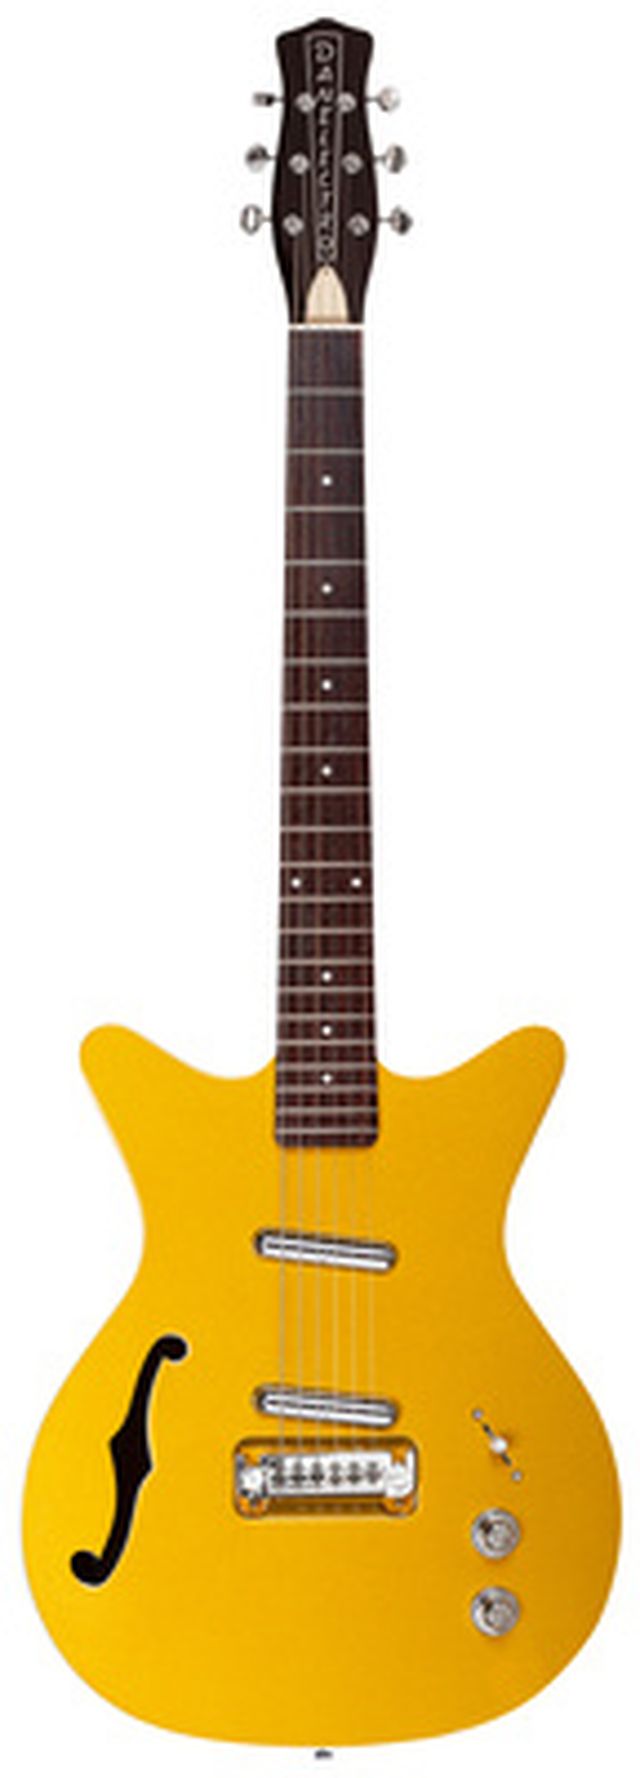 Danelectro Fifty Niner Gold Top